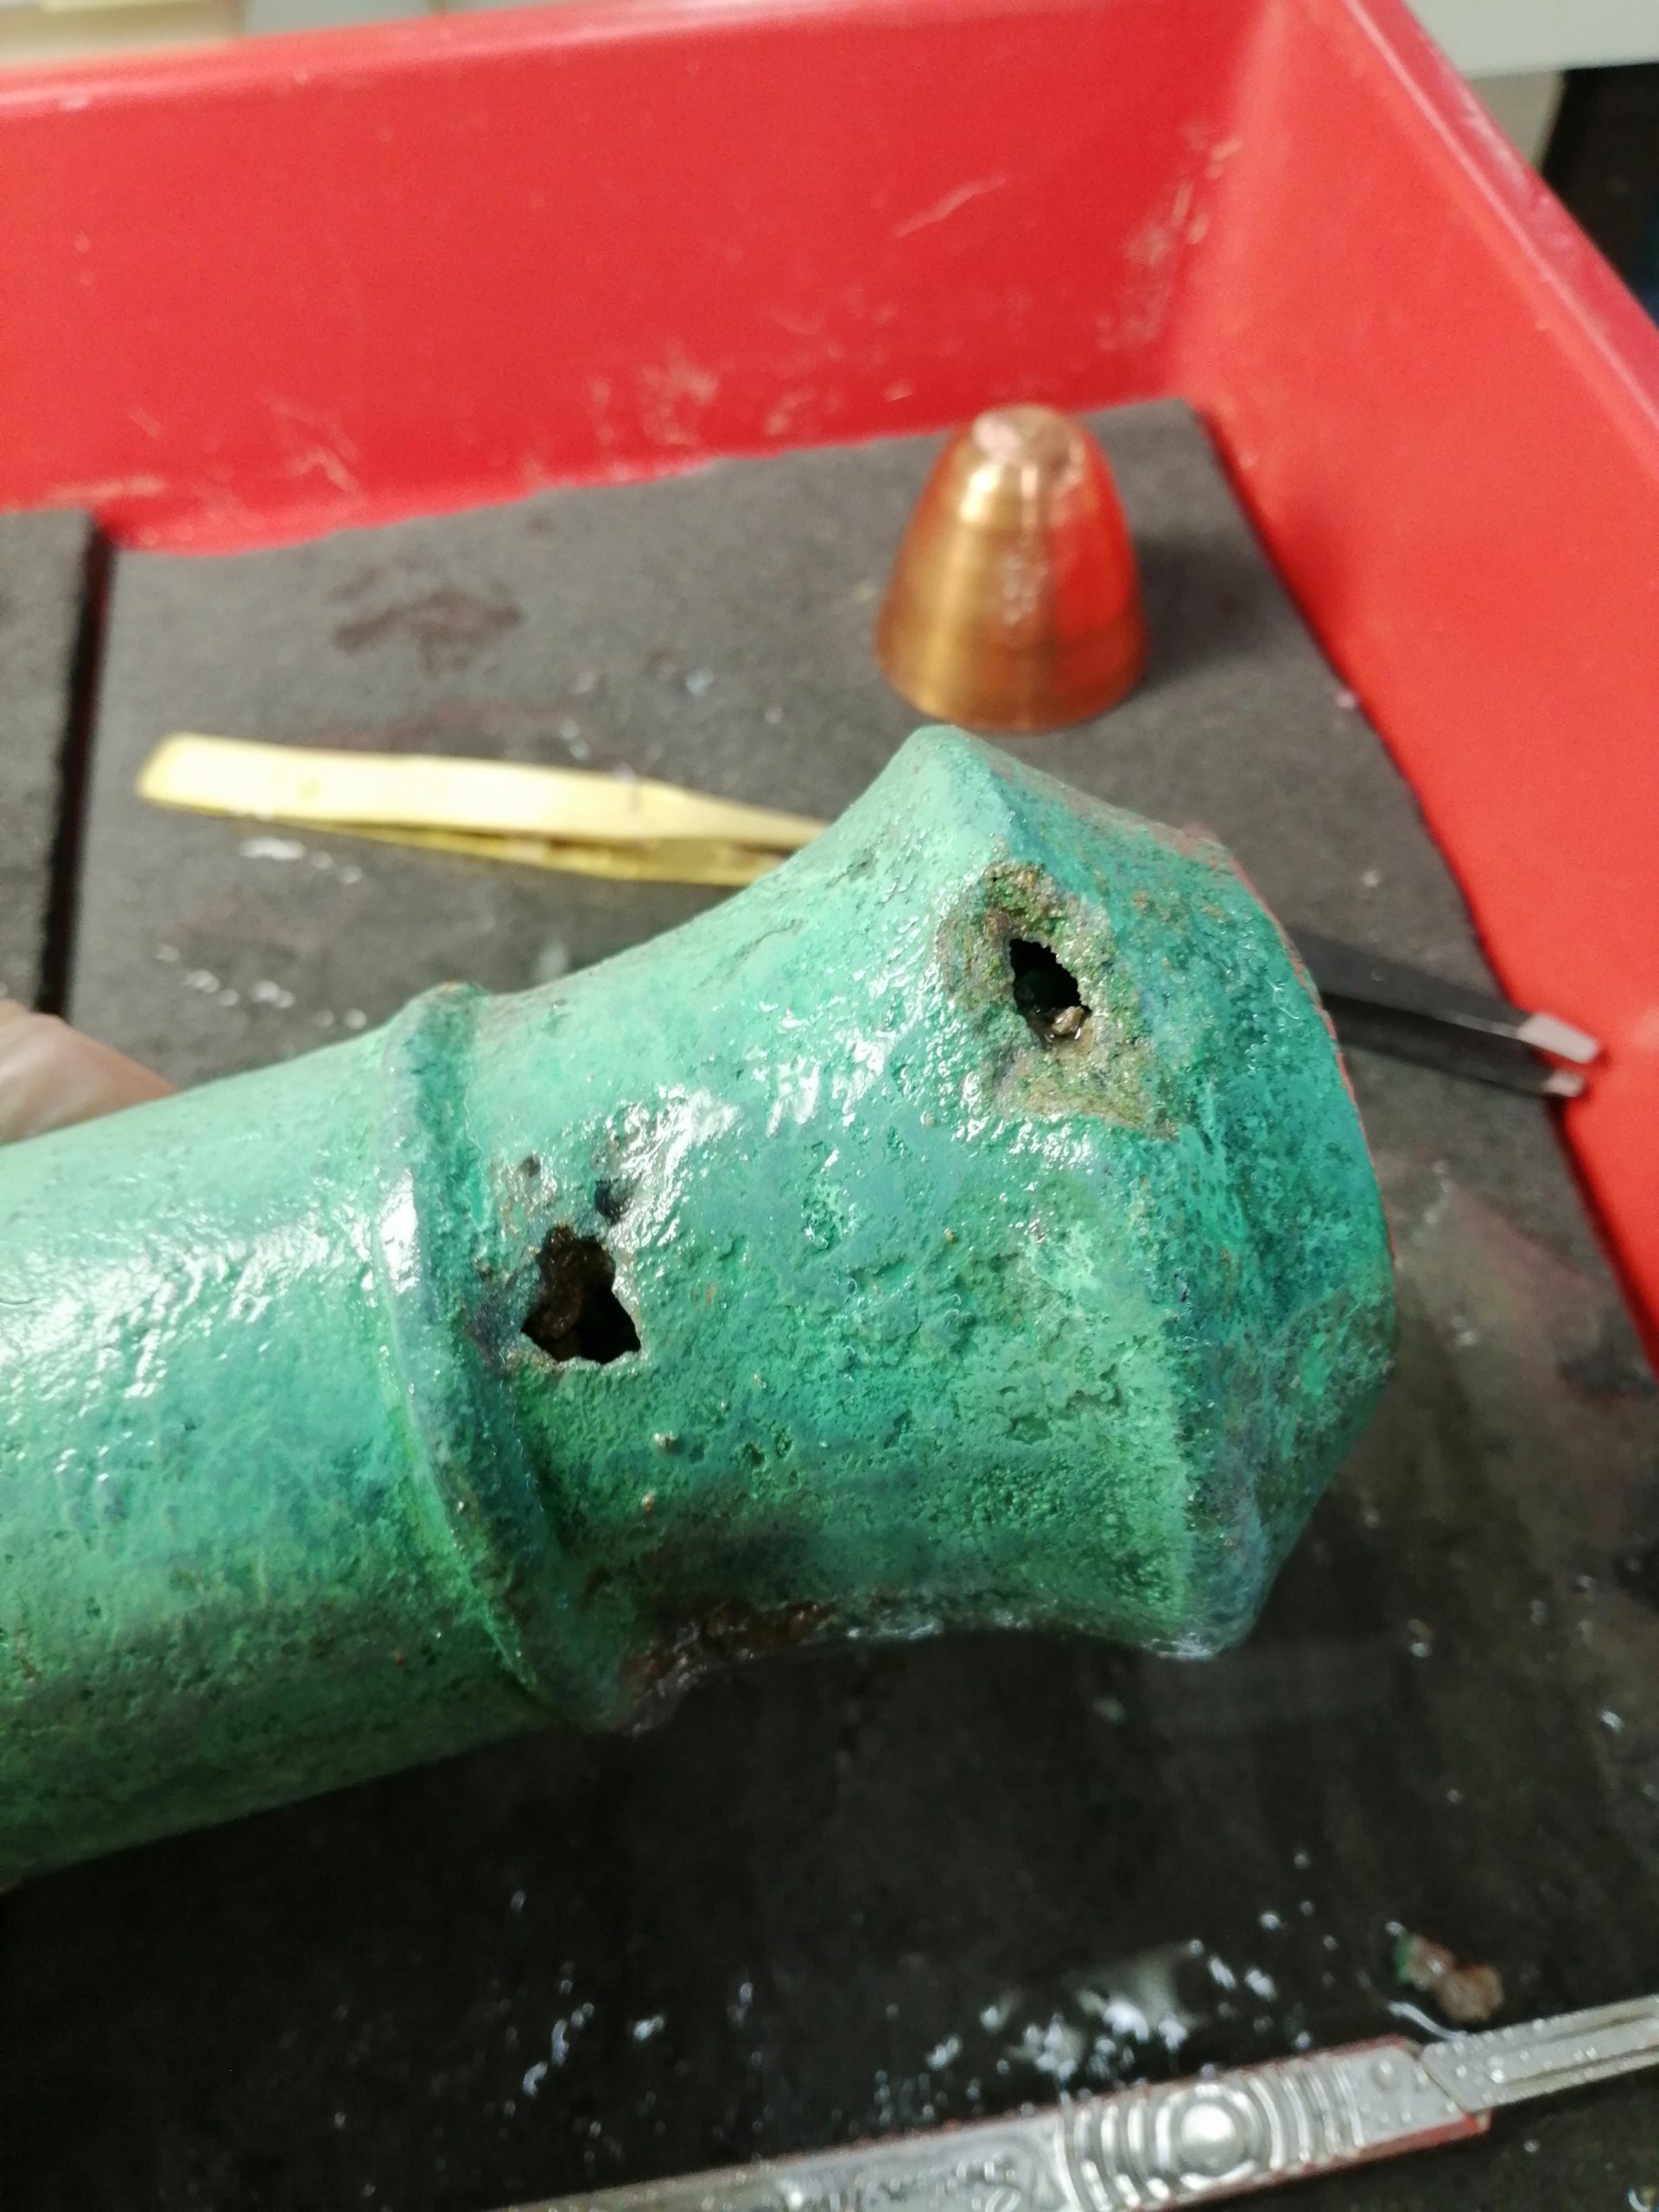 Assessment and documentation of signal cannon with corrosion losses.